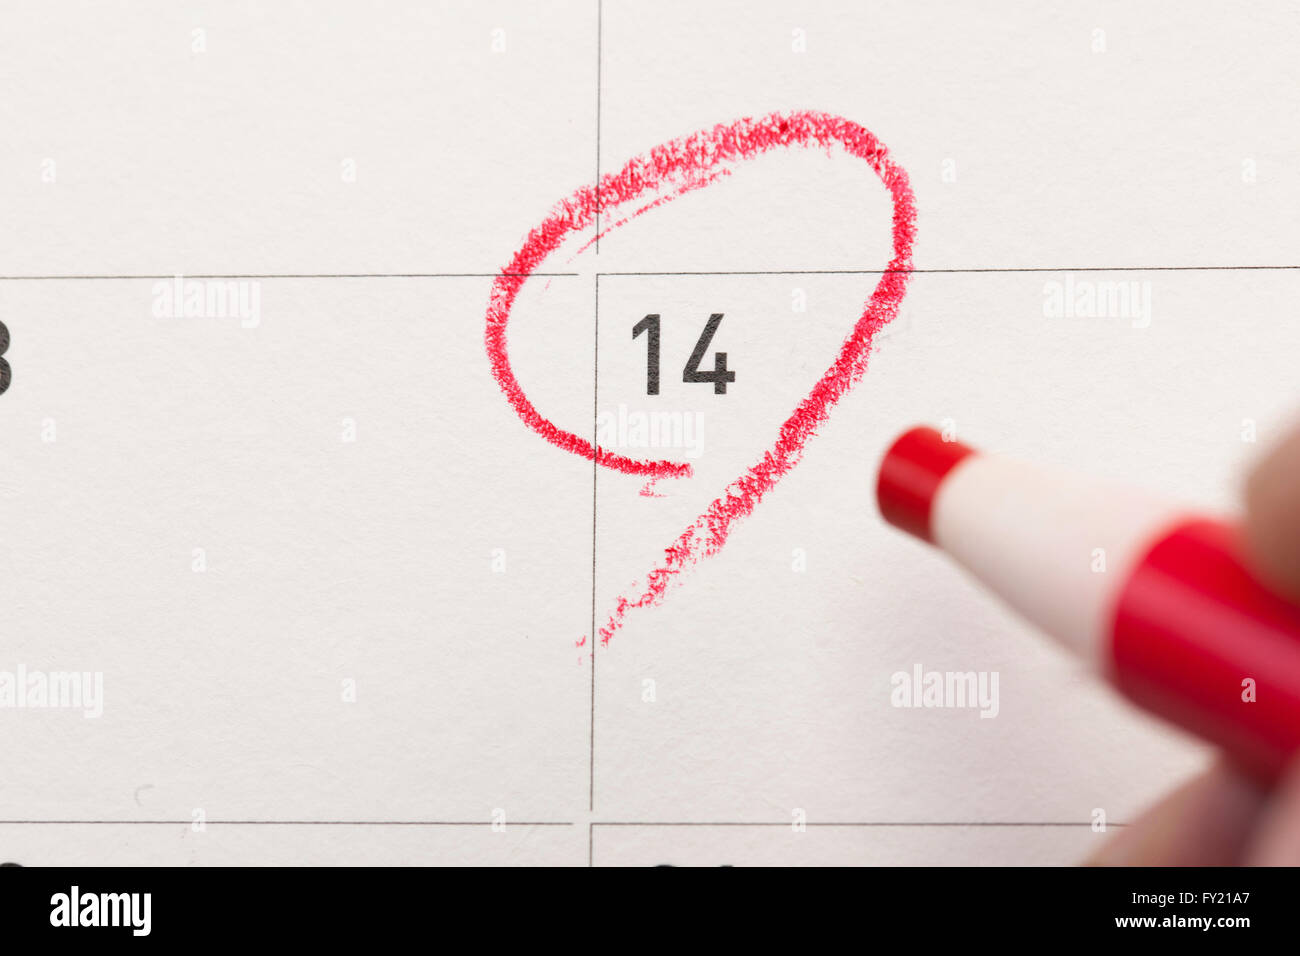 Calendar date 14 marked with red color with red color pencil Stock Photo